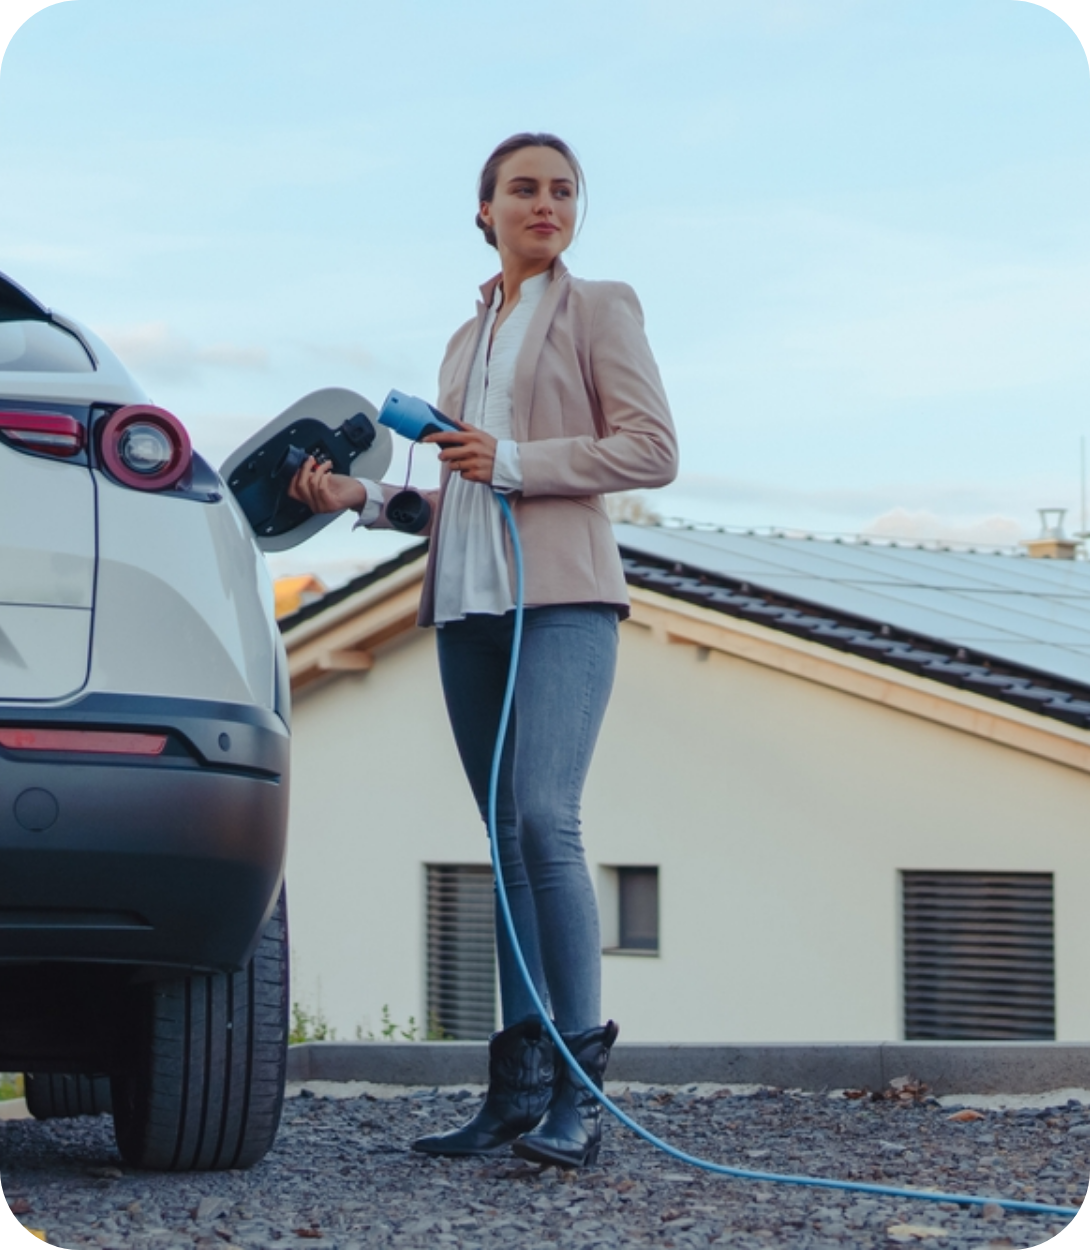 Woman Holding an Electric Vehicle Charger